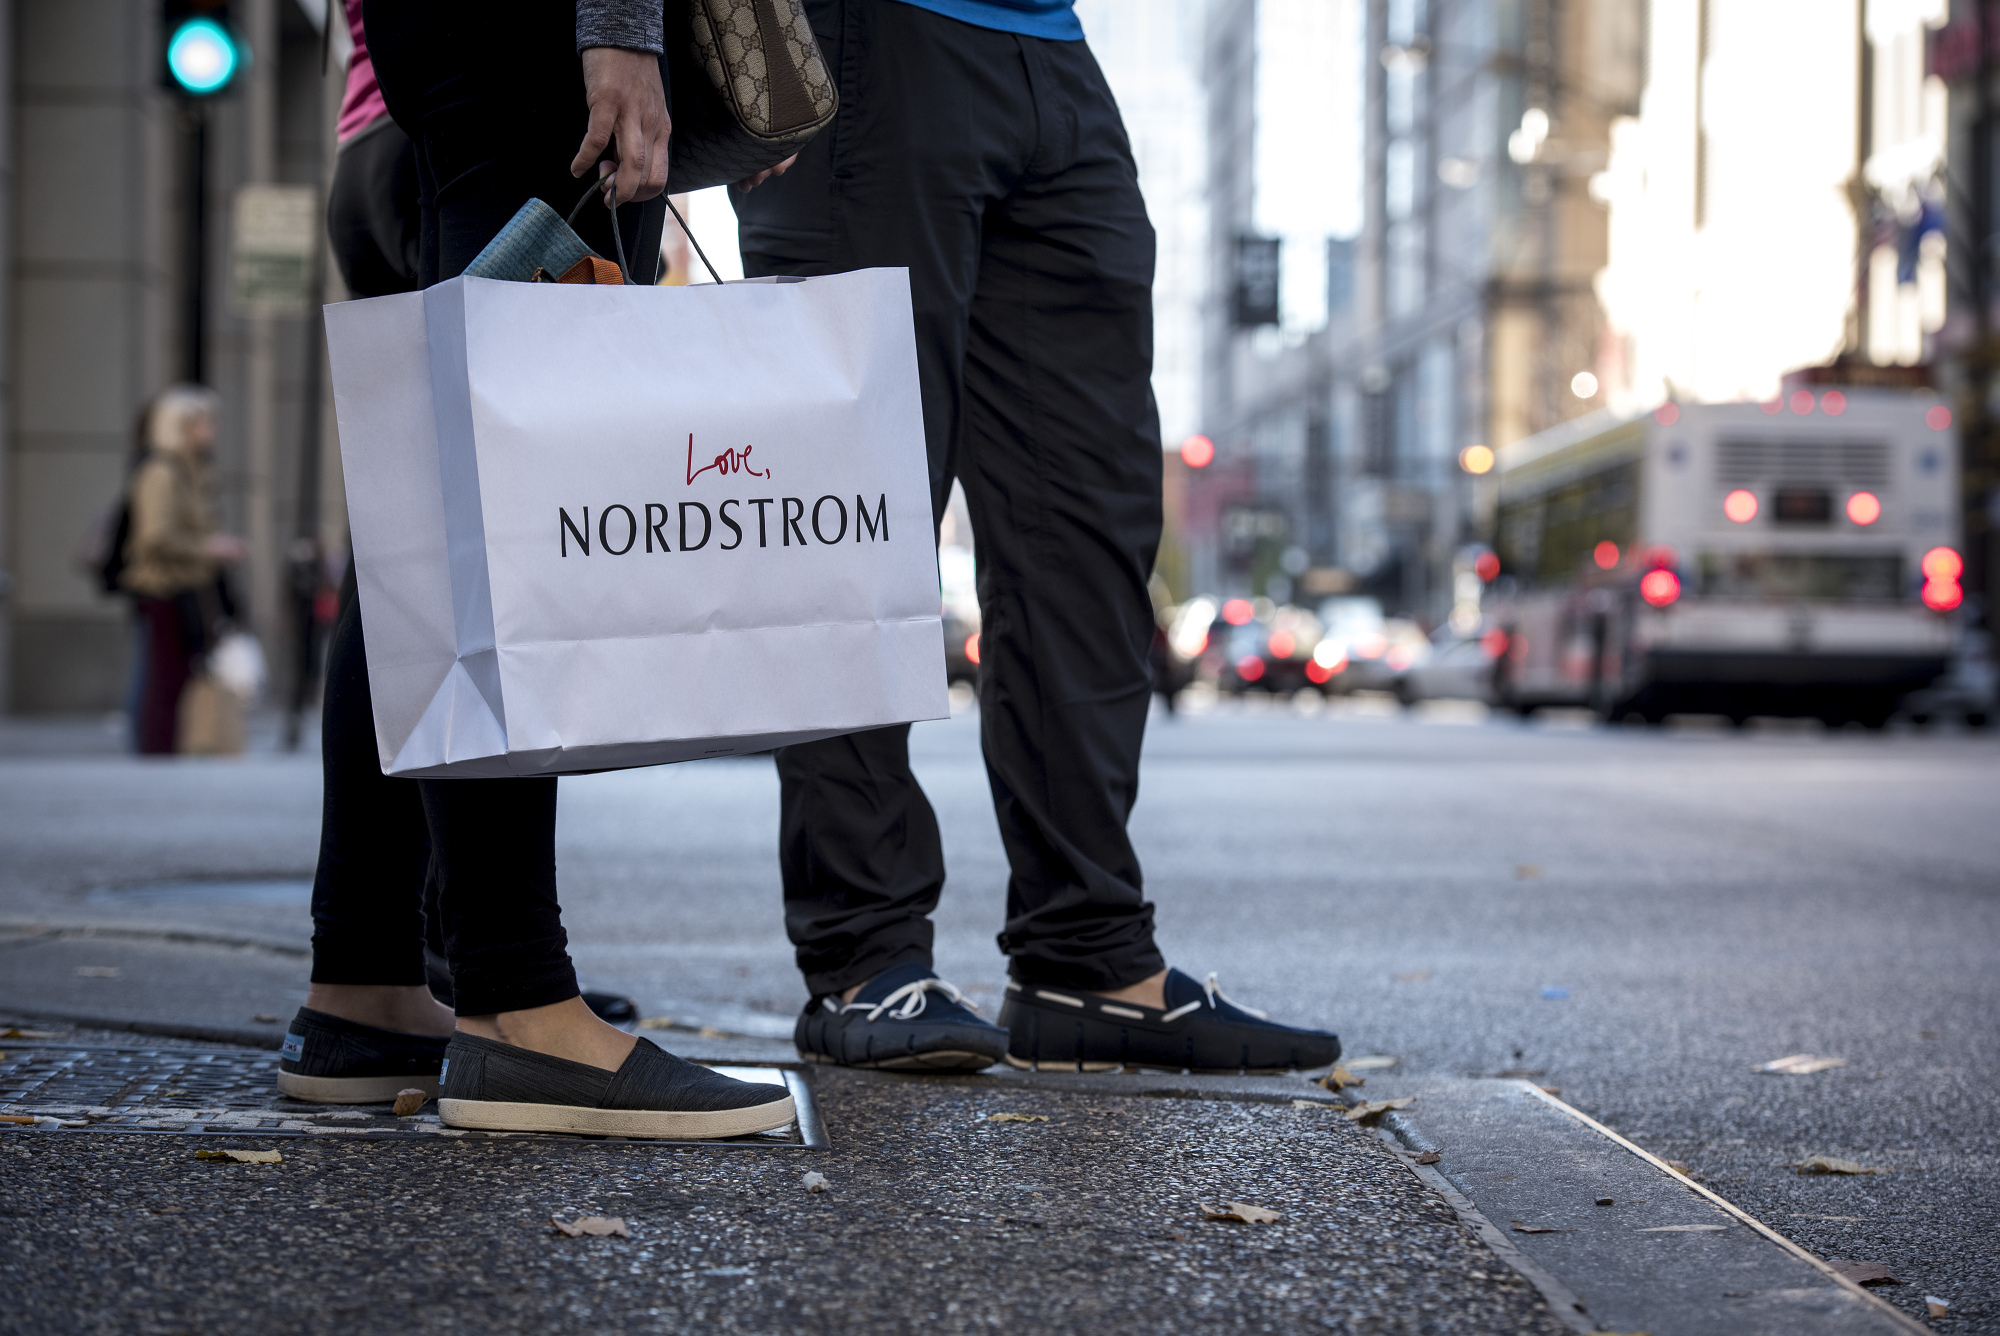 Have memories of Nordstrom flagship store in Seattle? Share your story